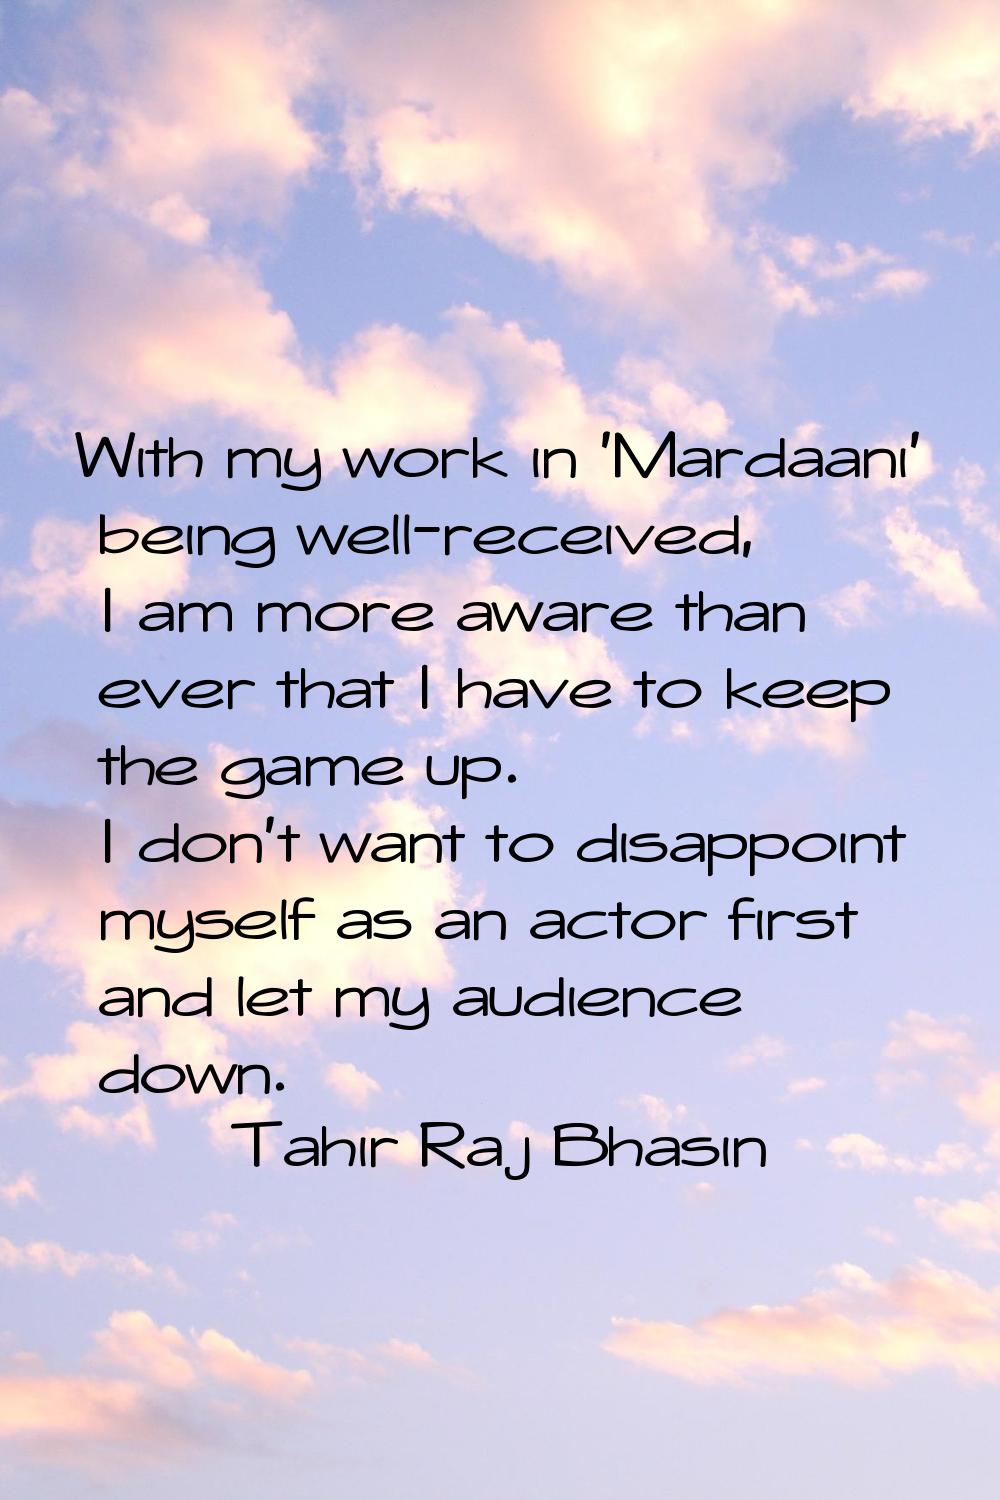 With my work in 'Mardaani' being well-received, I am more aware than ever that I have to keep the g